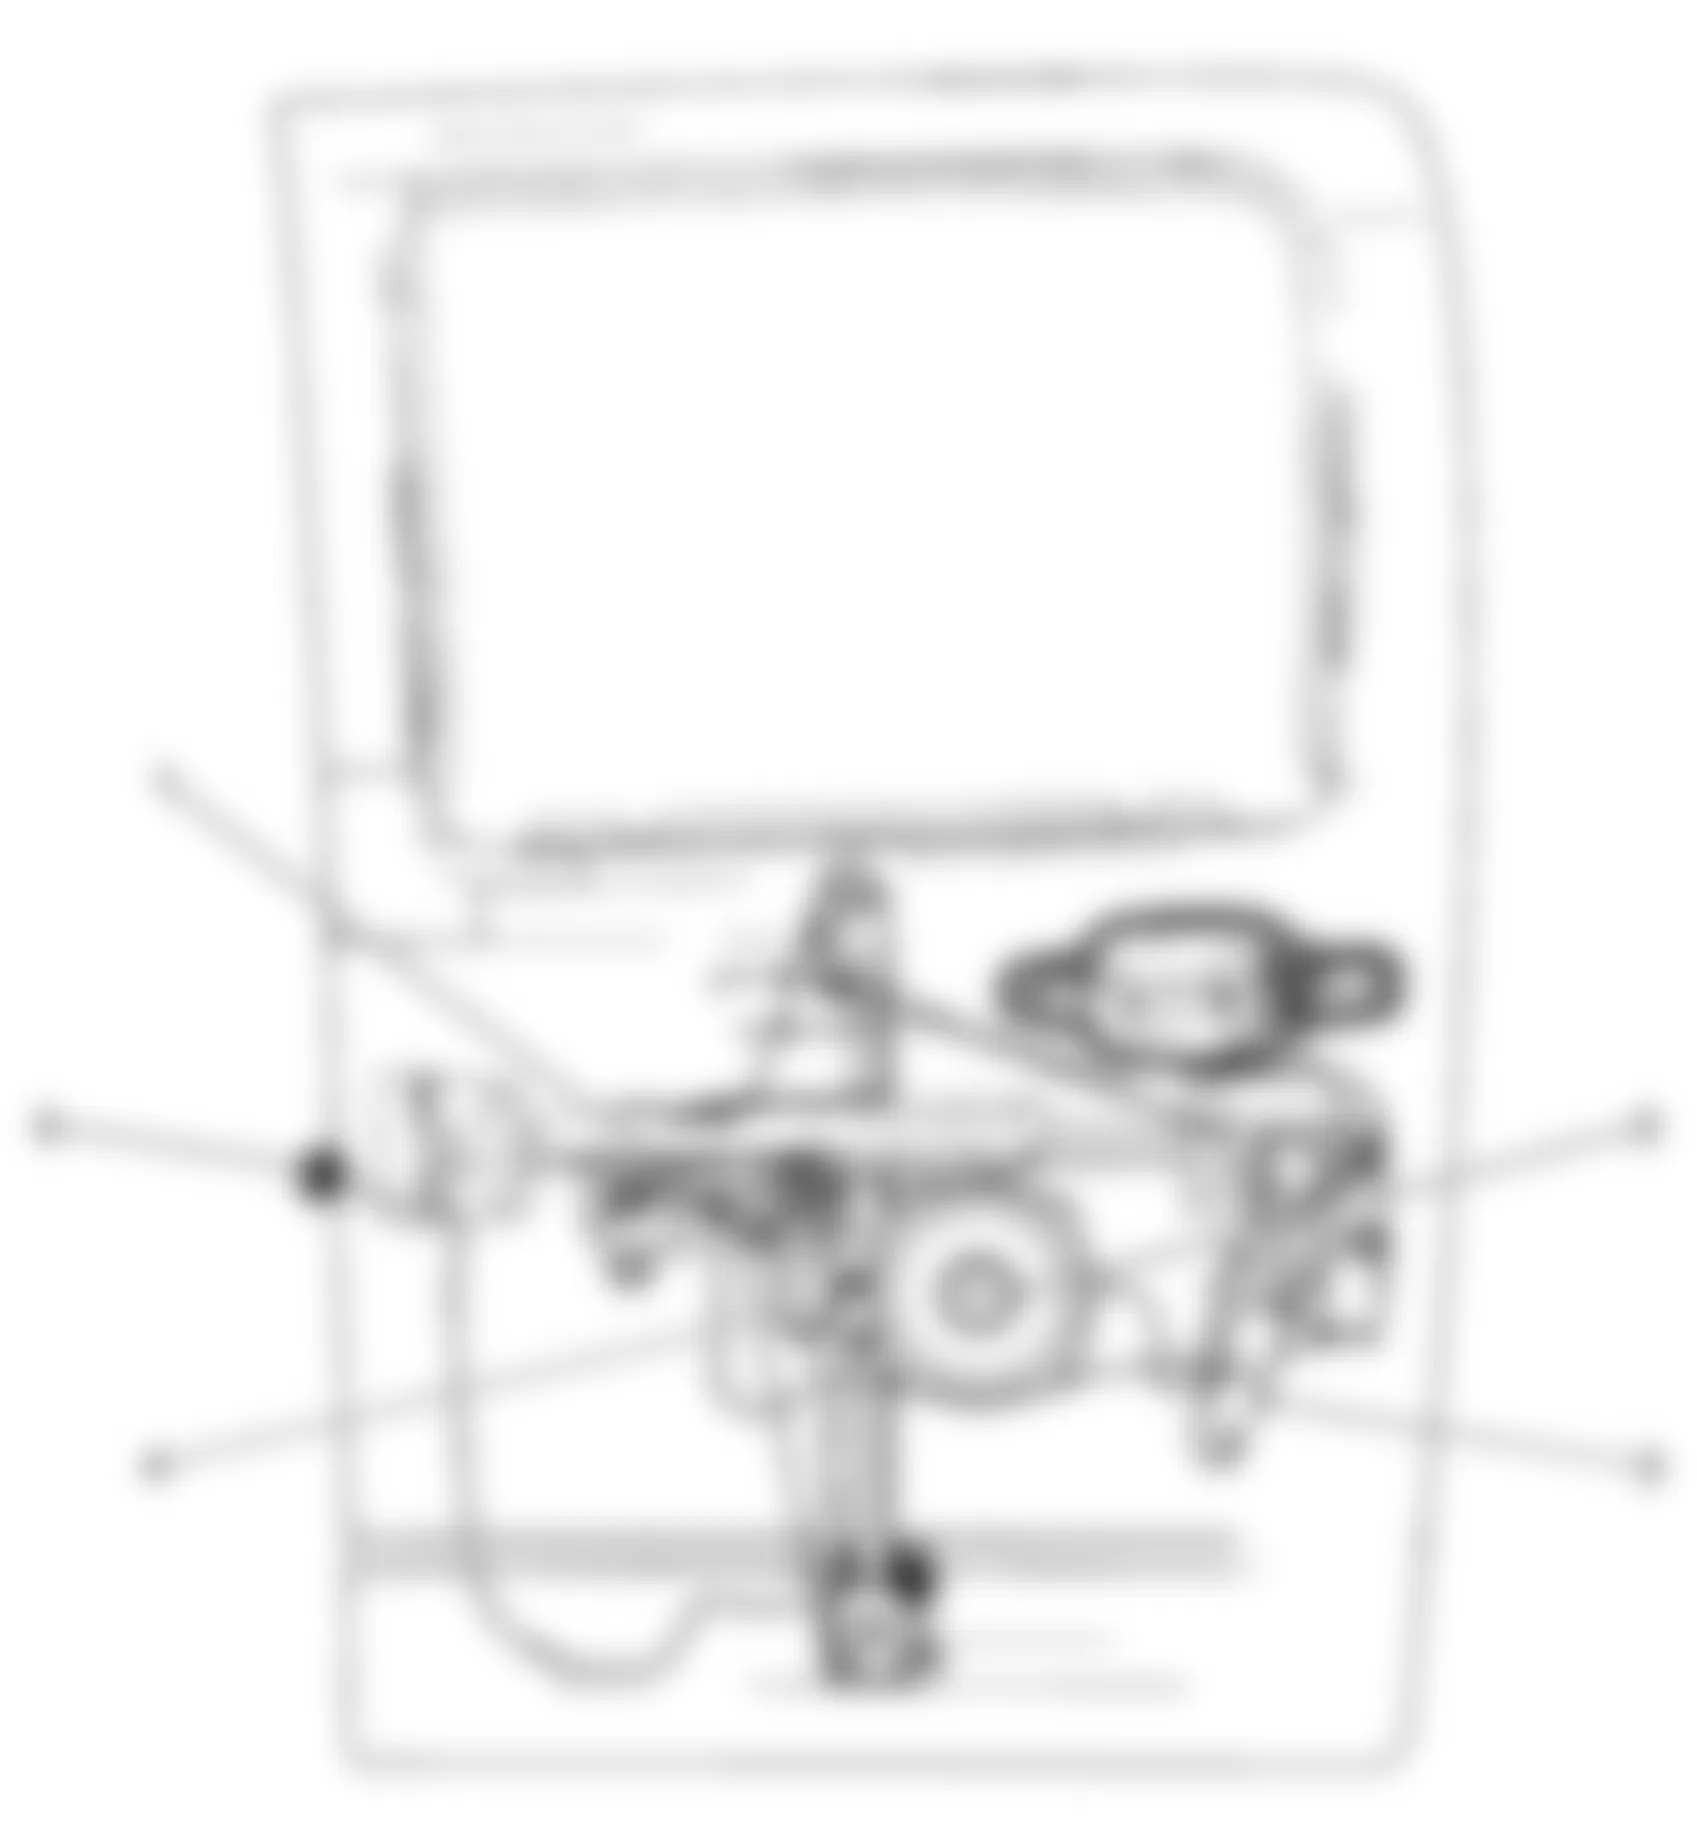 GMC Canyon 2010 - Component Locations -  Right Rear Door (Crew Cab)